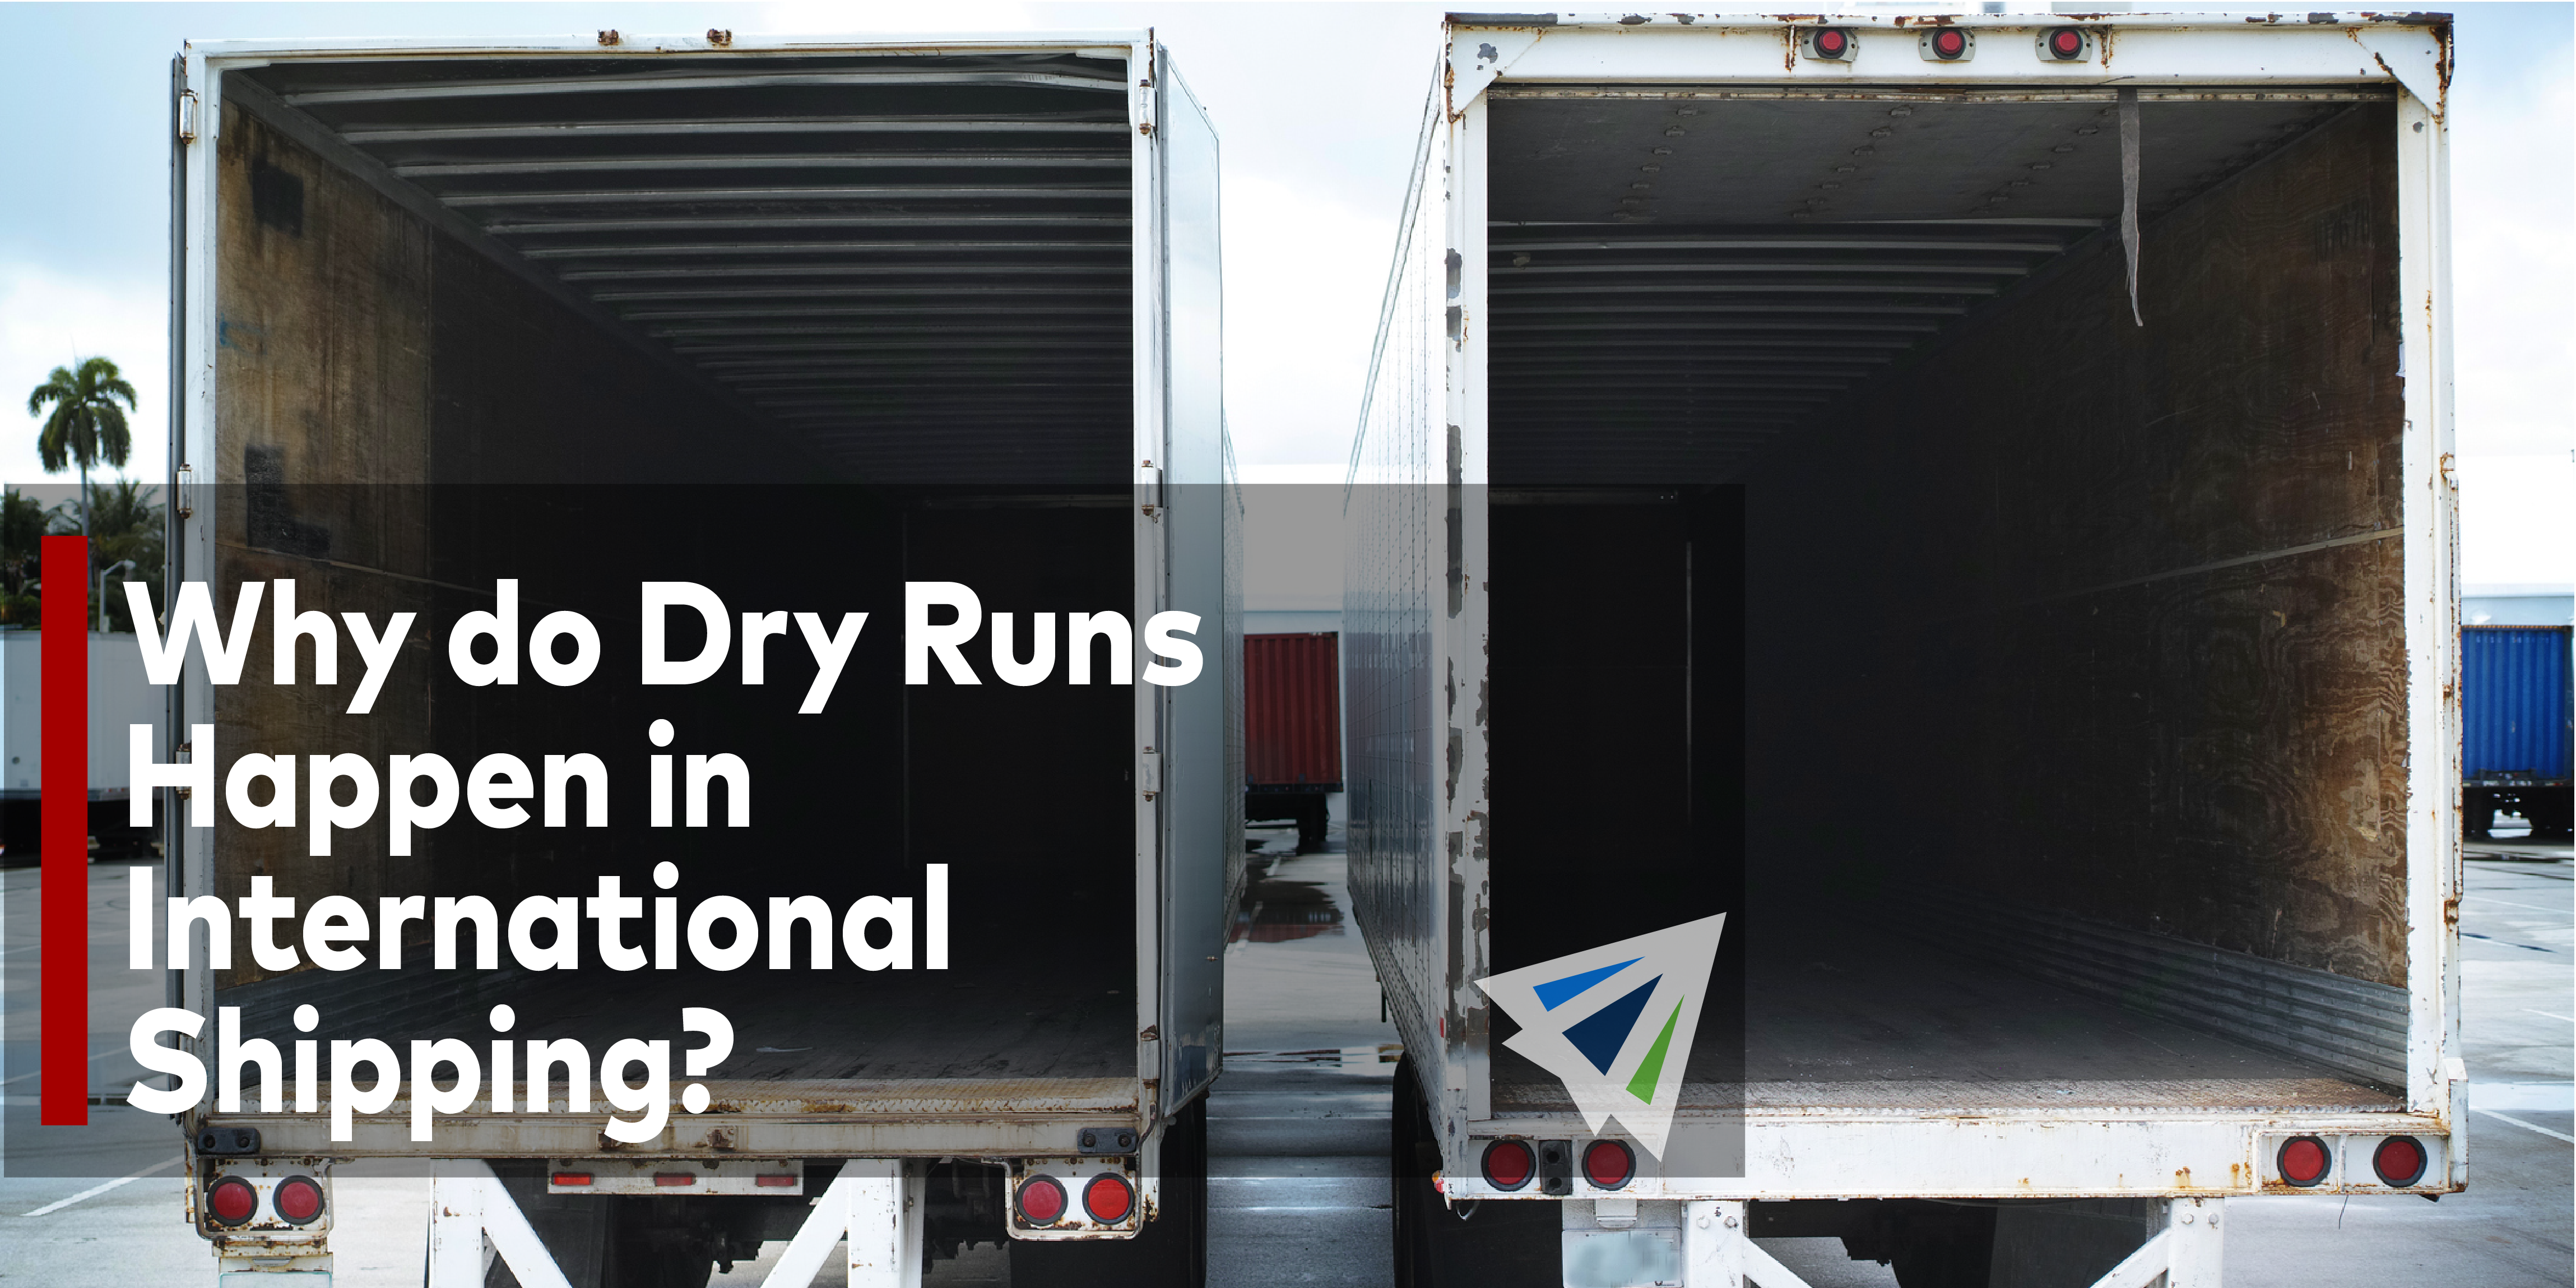 https://www.interlogusa.com/wp-content/uploads/2020/11/Why-Do-Dry-Runs-Happen-in-International-Shipping.png